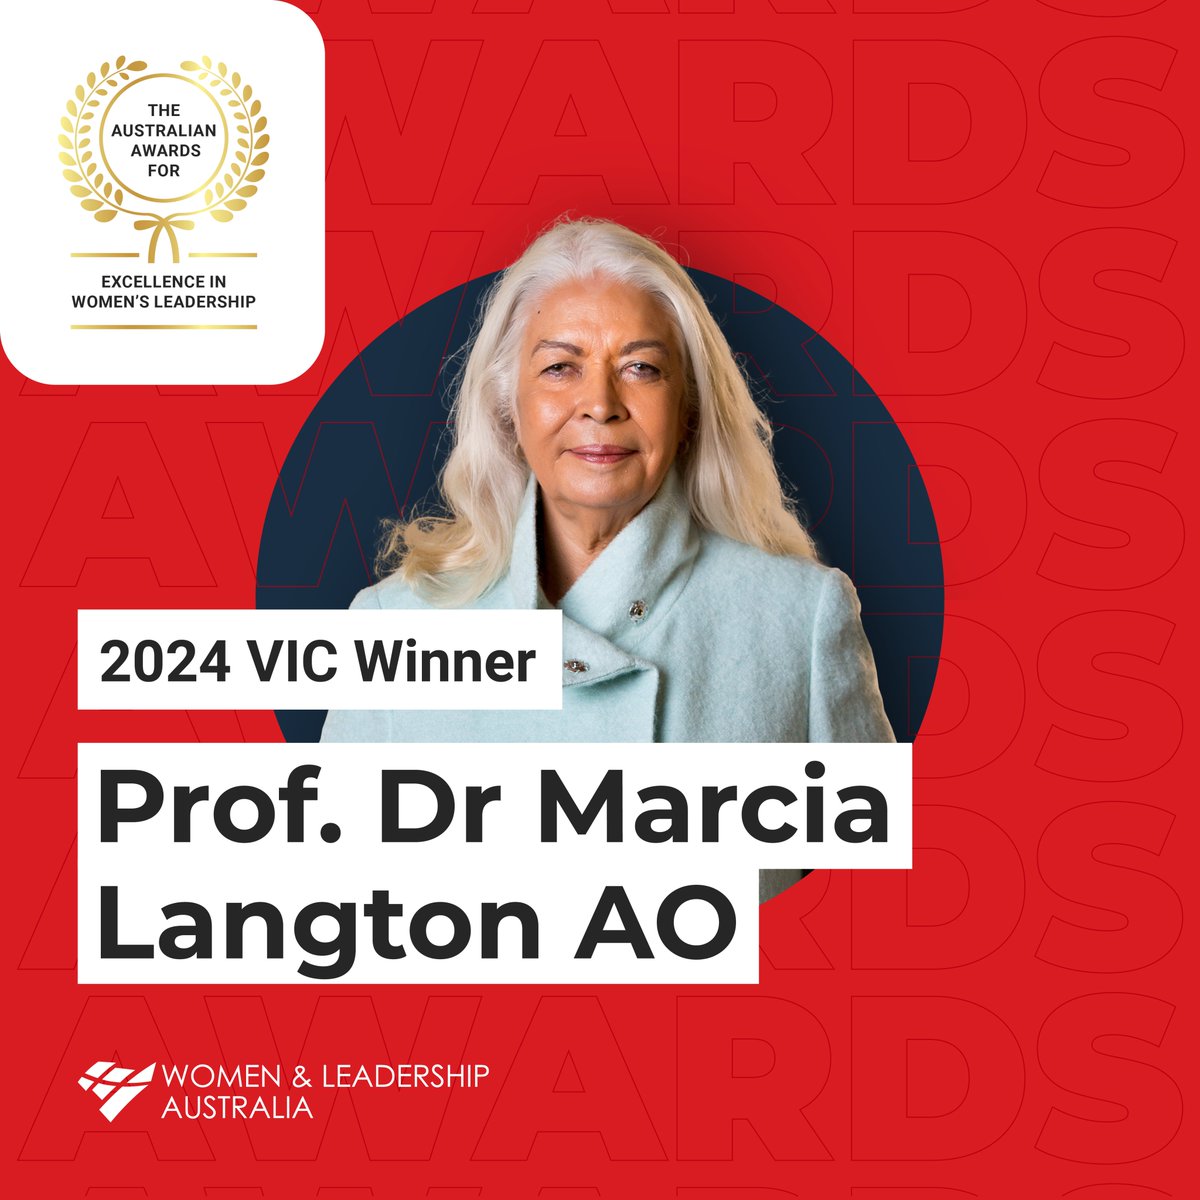 Professor Marcia Langton has been awarded the 2024 VIC Award for Excellence in Women's Leadership! The award will be presented at the Australian Women's Leadership Symposium in Melbourne on Friday 9th August. Find out more @WLASocial